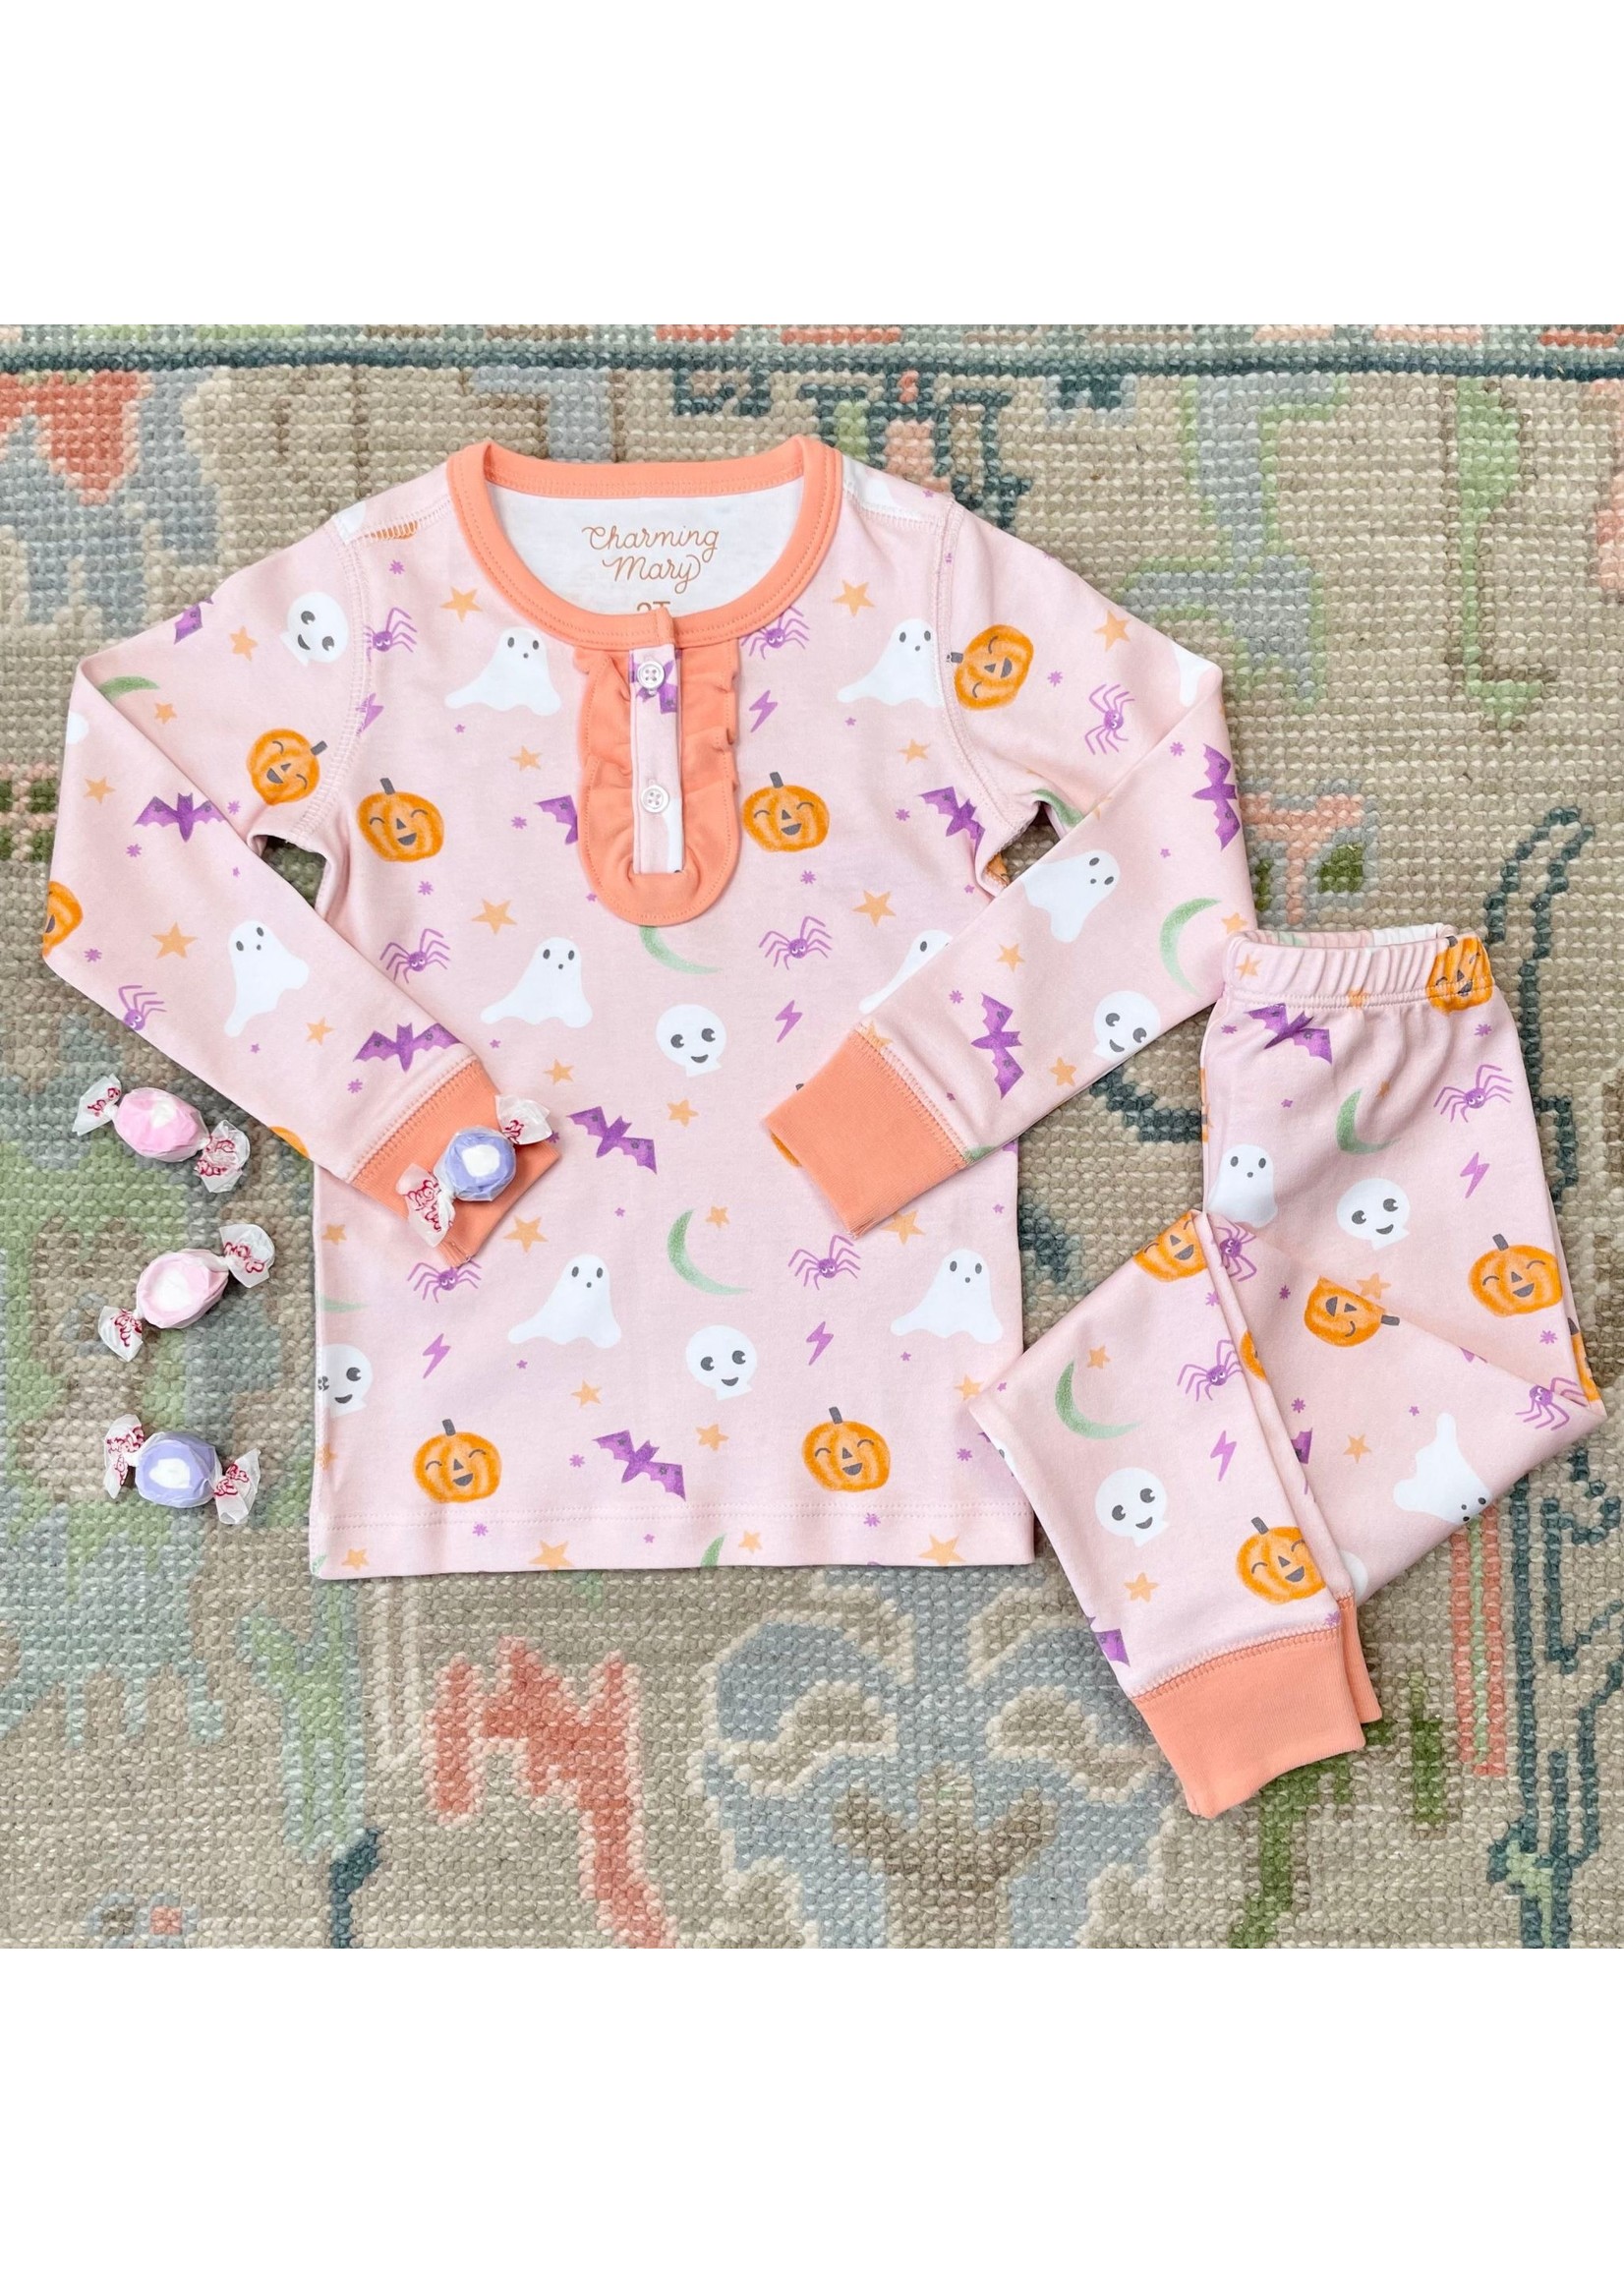 Charming Mary Pink & Spooky Langley PJ Set